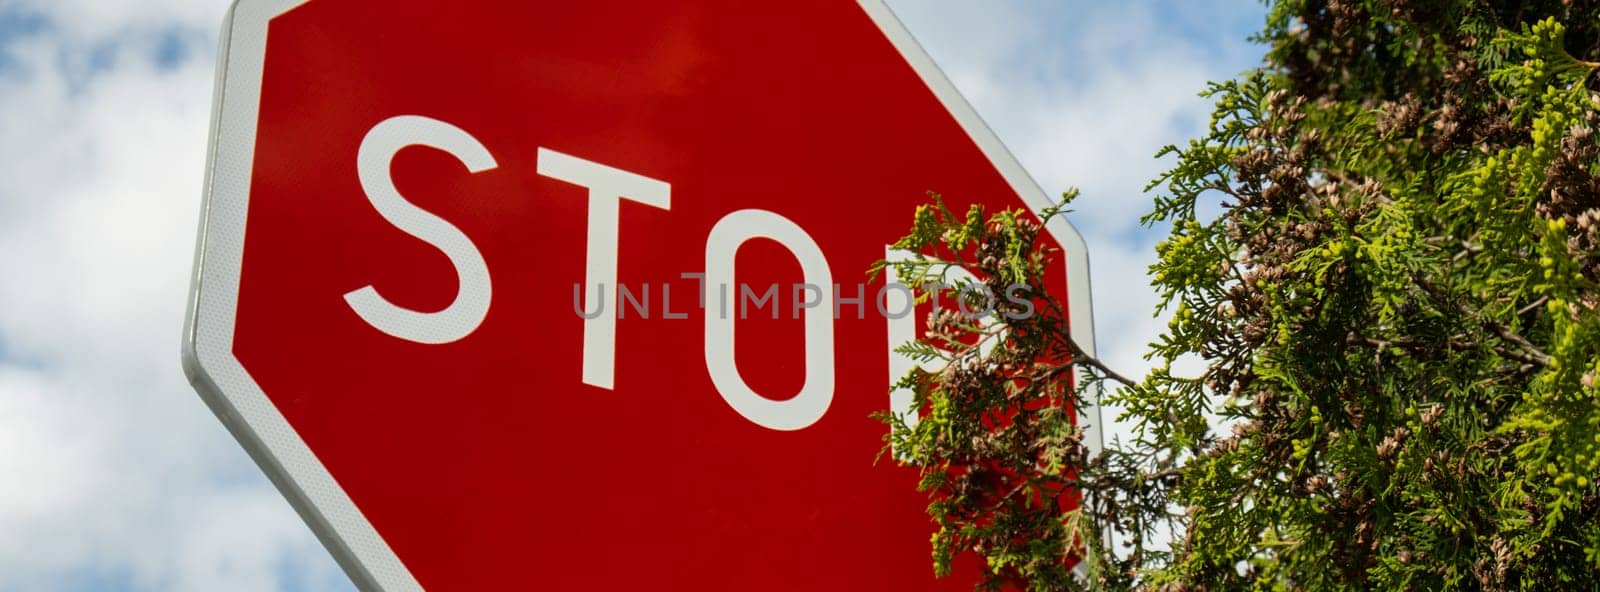 Red stop sign on metal pole on street. Road attention sign on cloudy background. Outdoors